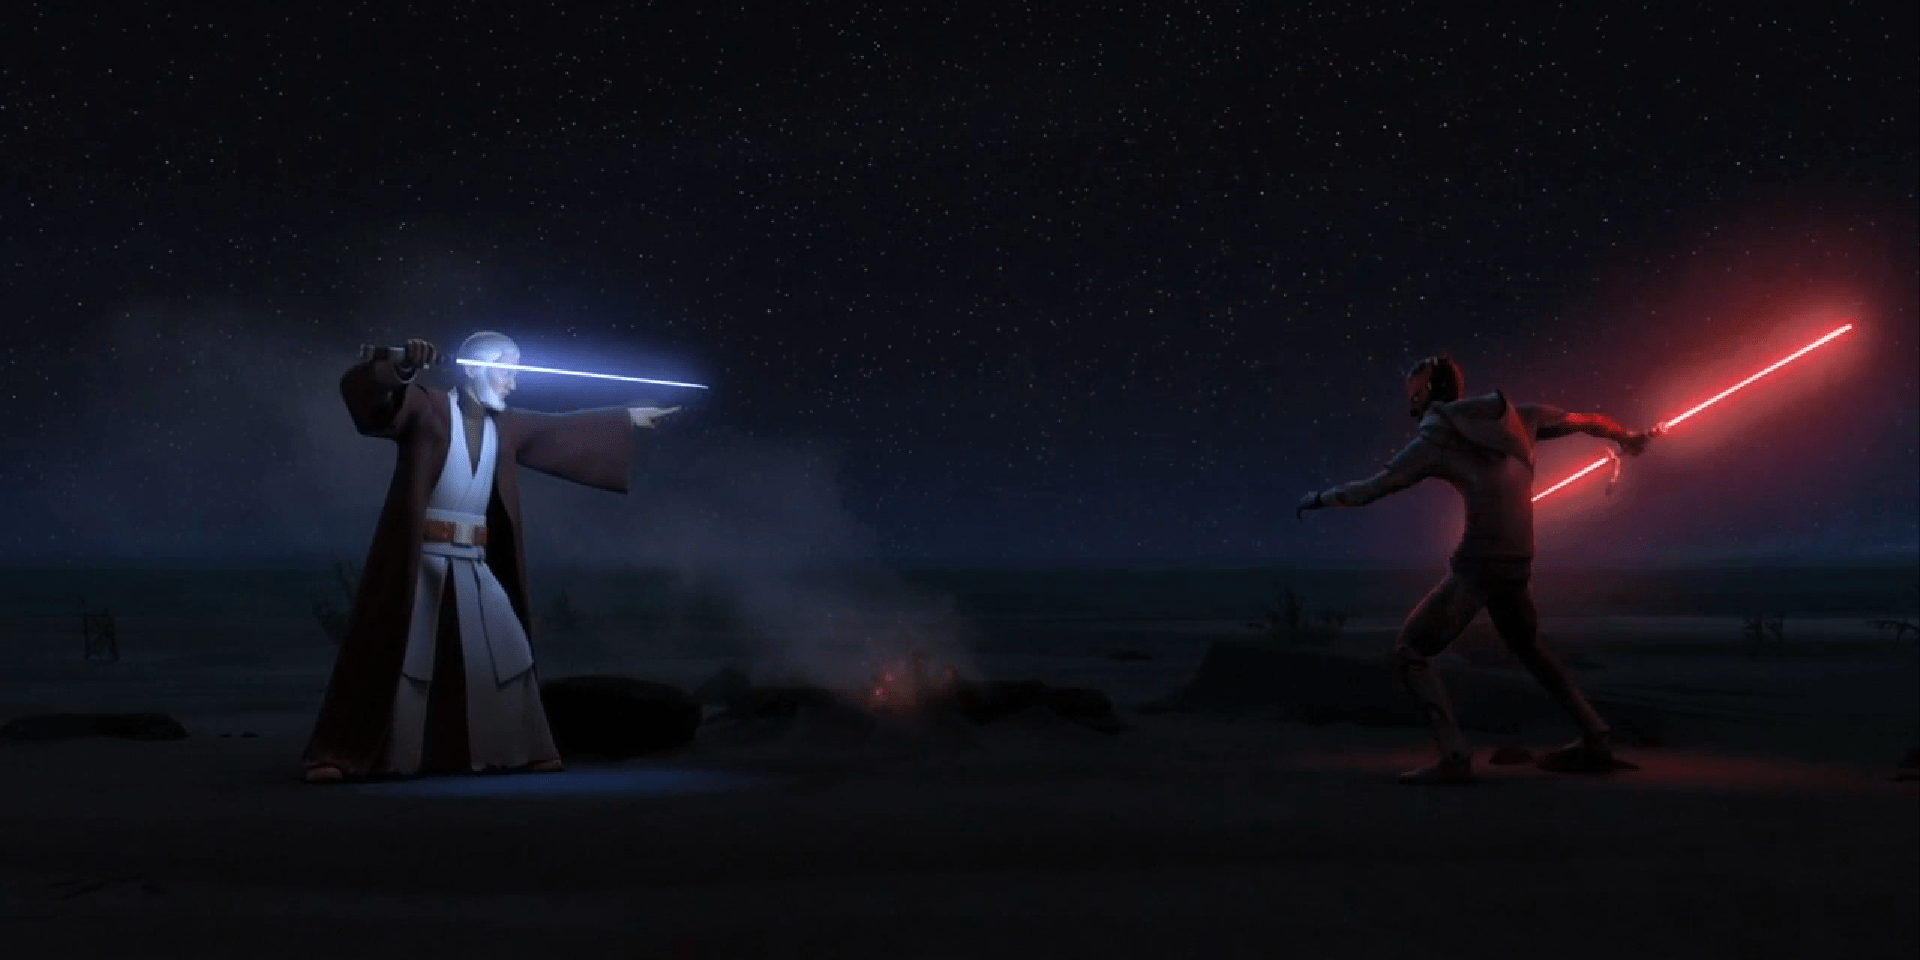 Maul and Obi-Wan prepare to have their final duel on Tatooine in Star Wars Rebels